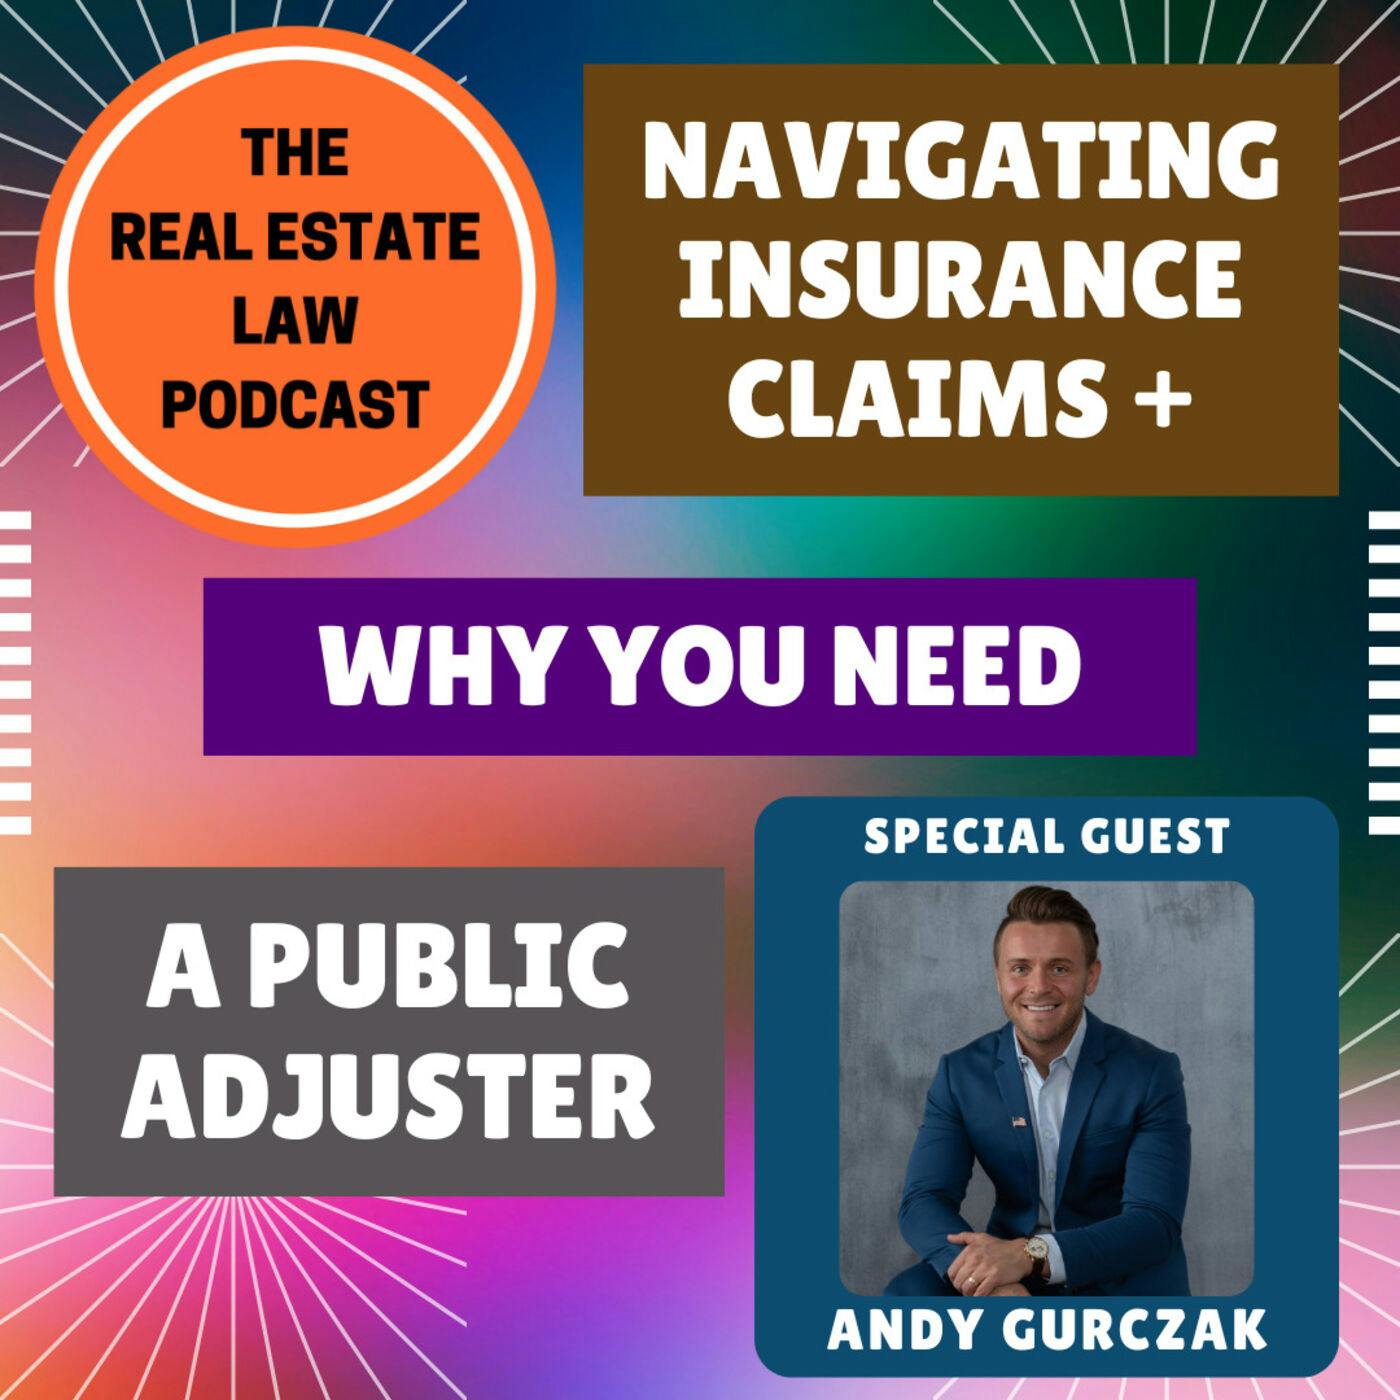 Why You Need a Public Adjuster - Navigating Insurance Claims with Andy Gurczak